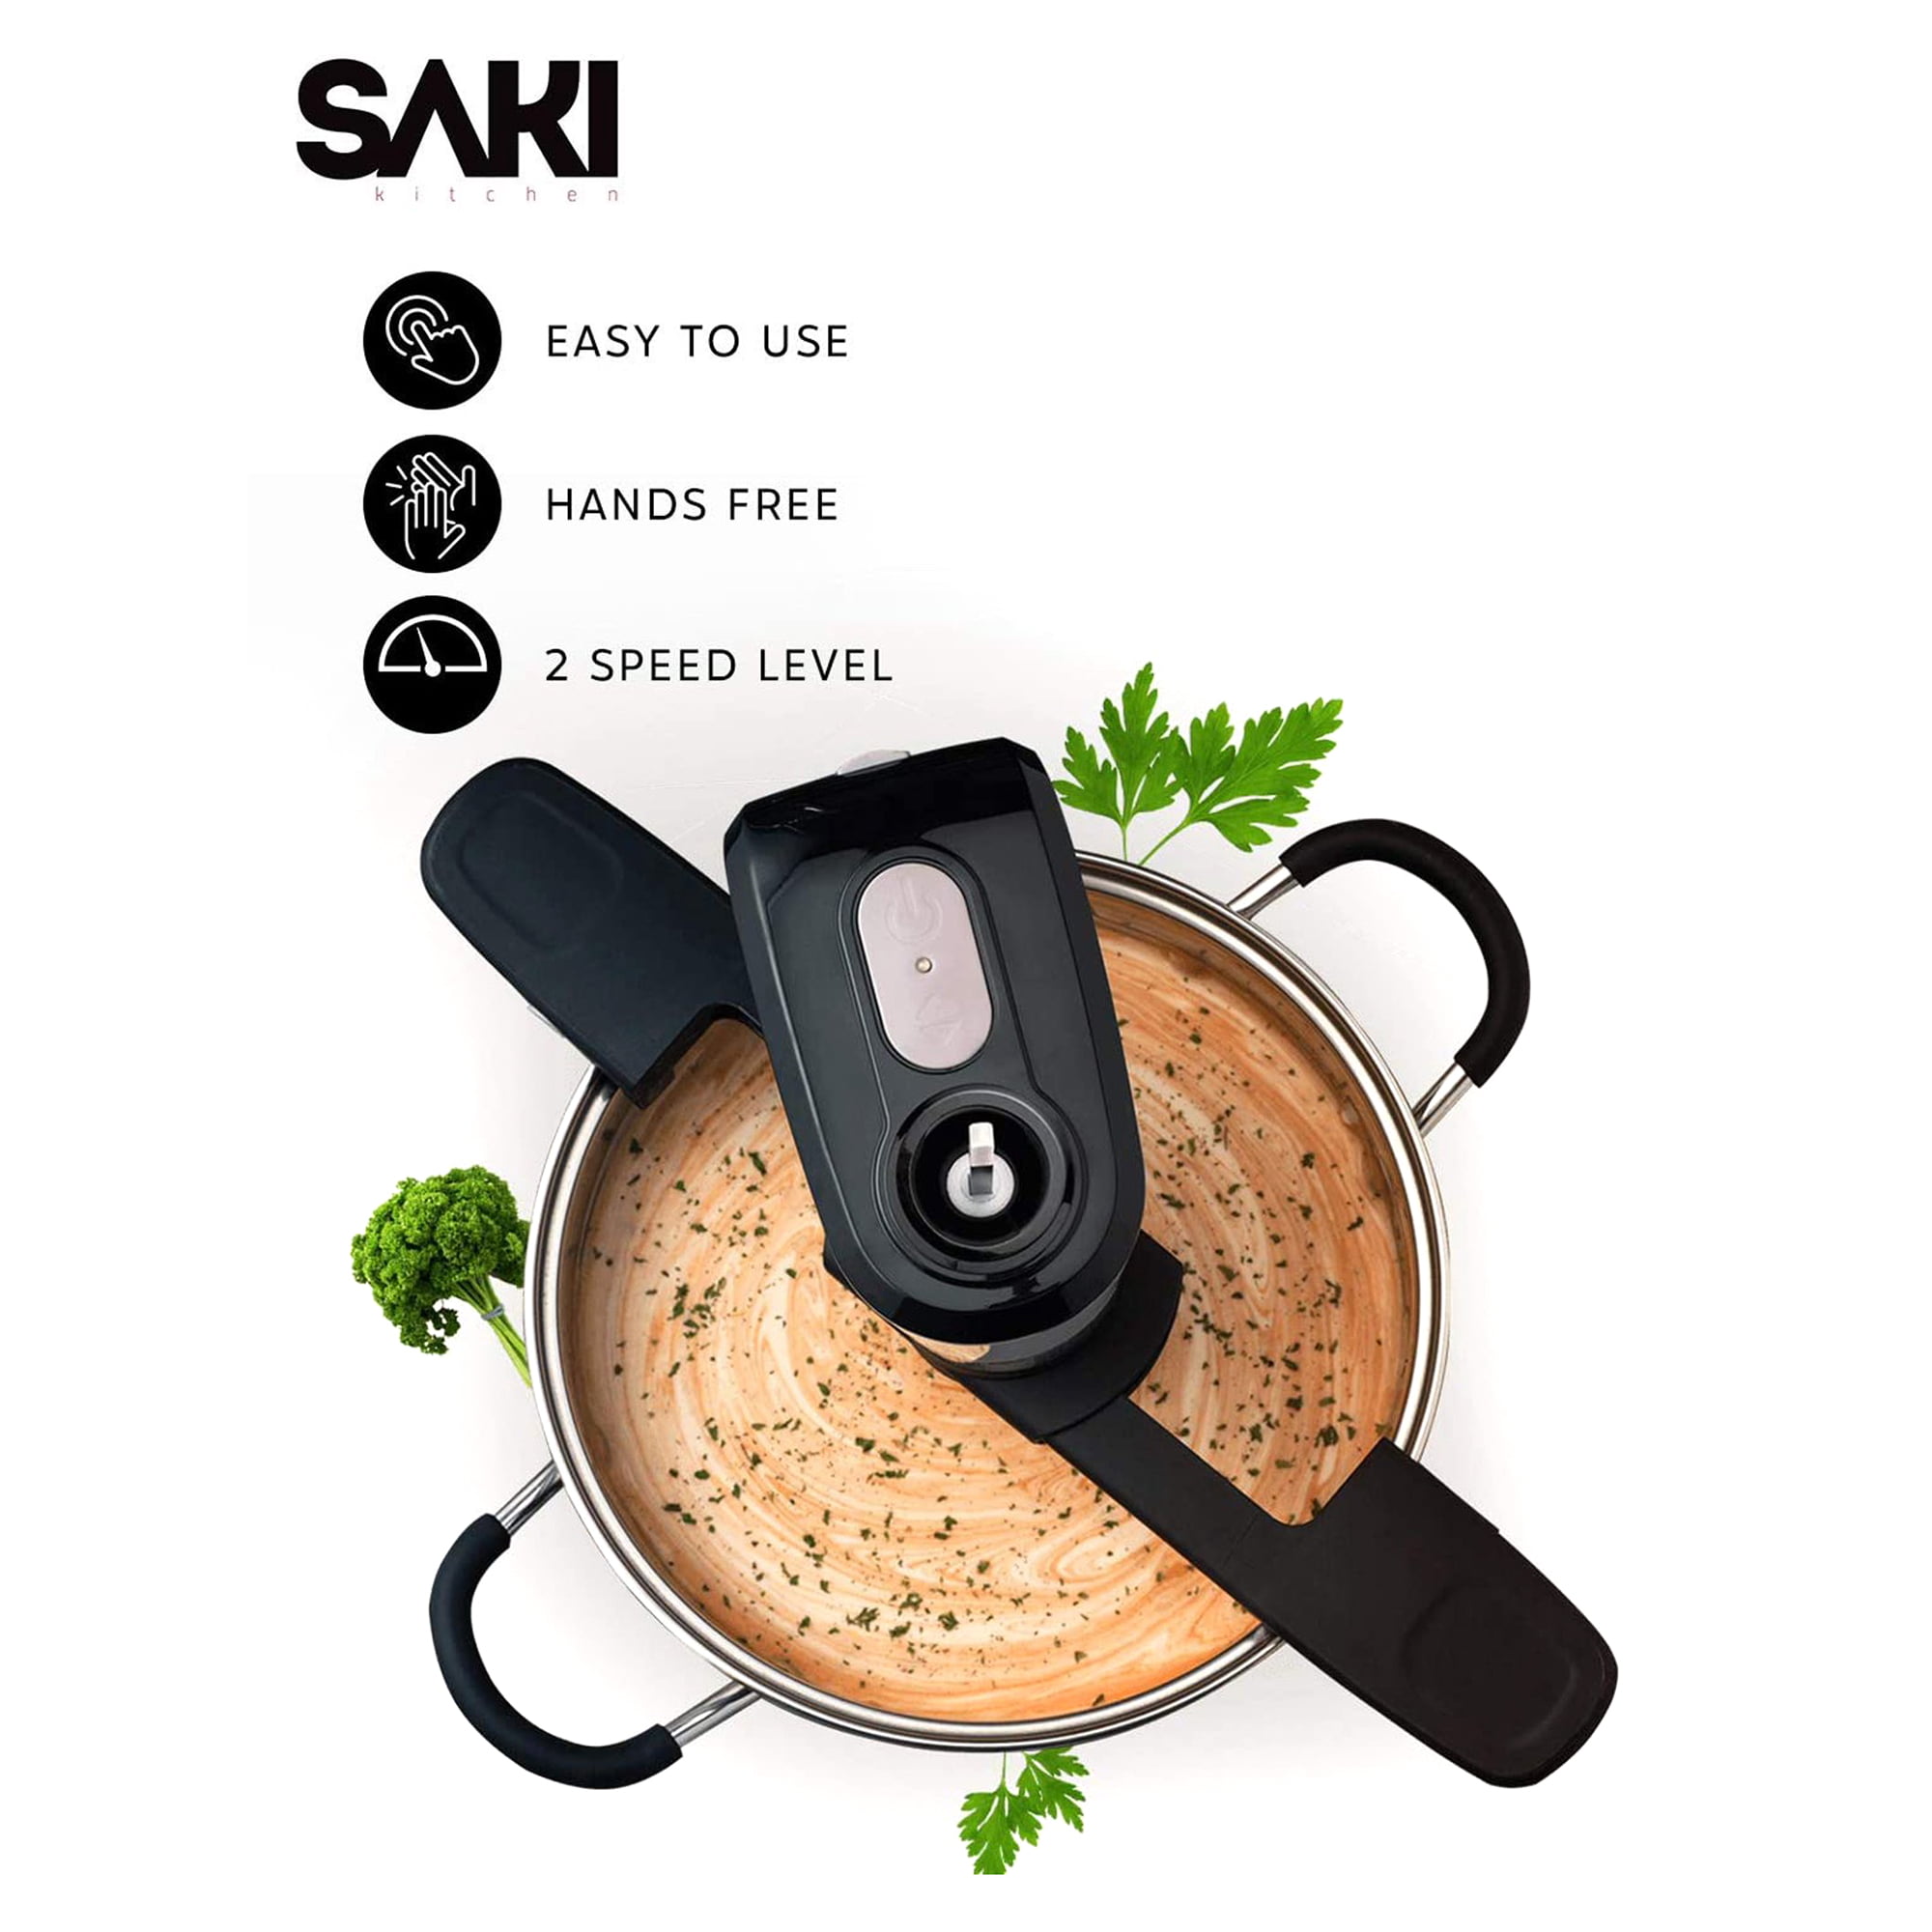  SAKI Automatic Pot Stirrer for Cooking, with 2 speeds